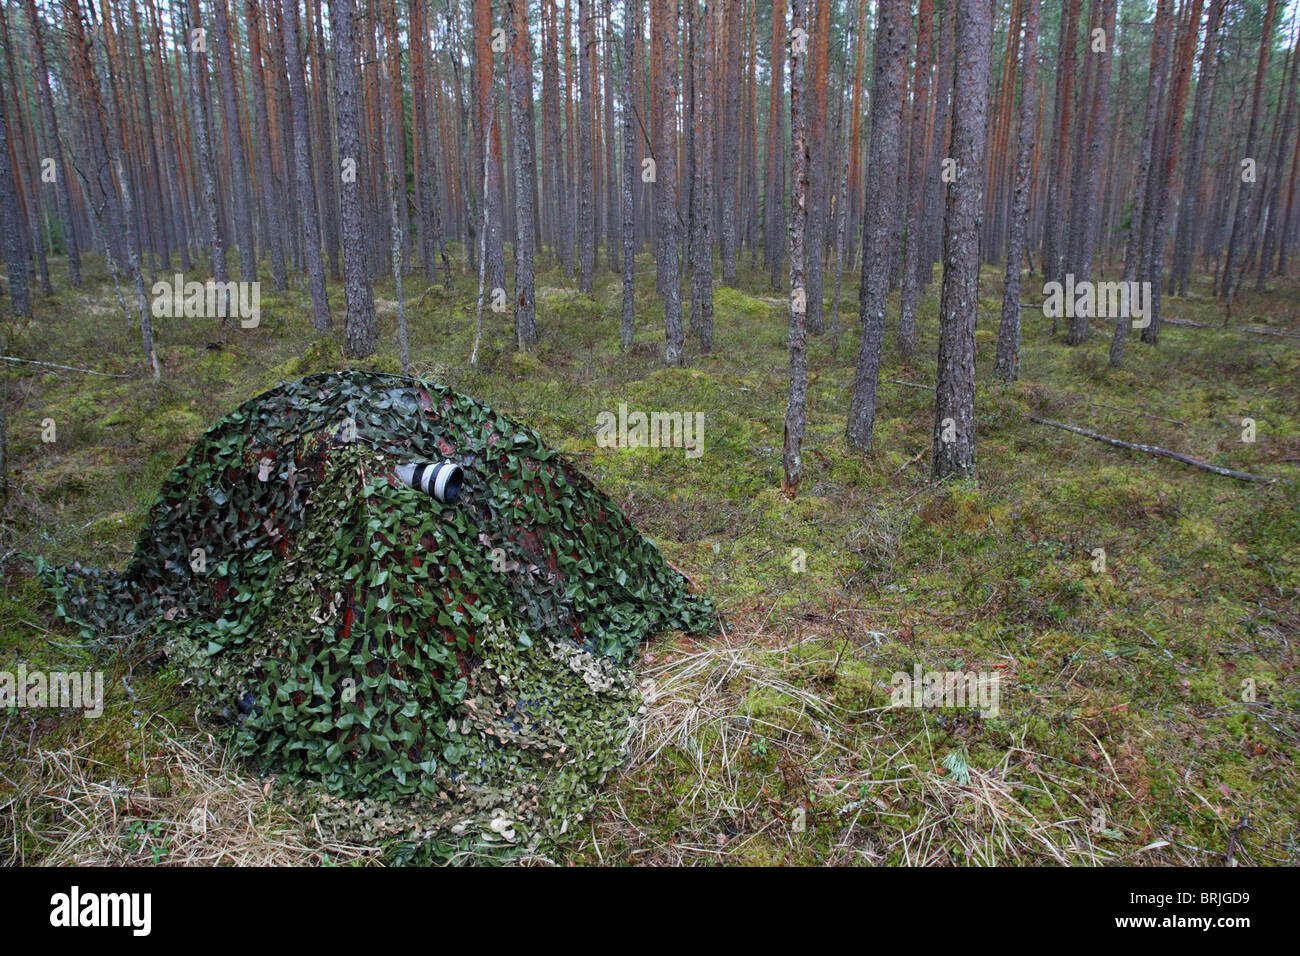 Photographic blind at Capercaillie (Tetrao urogallus) lek place. Stock Photo